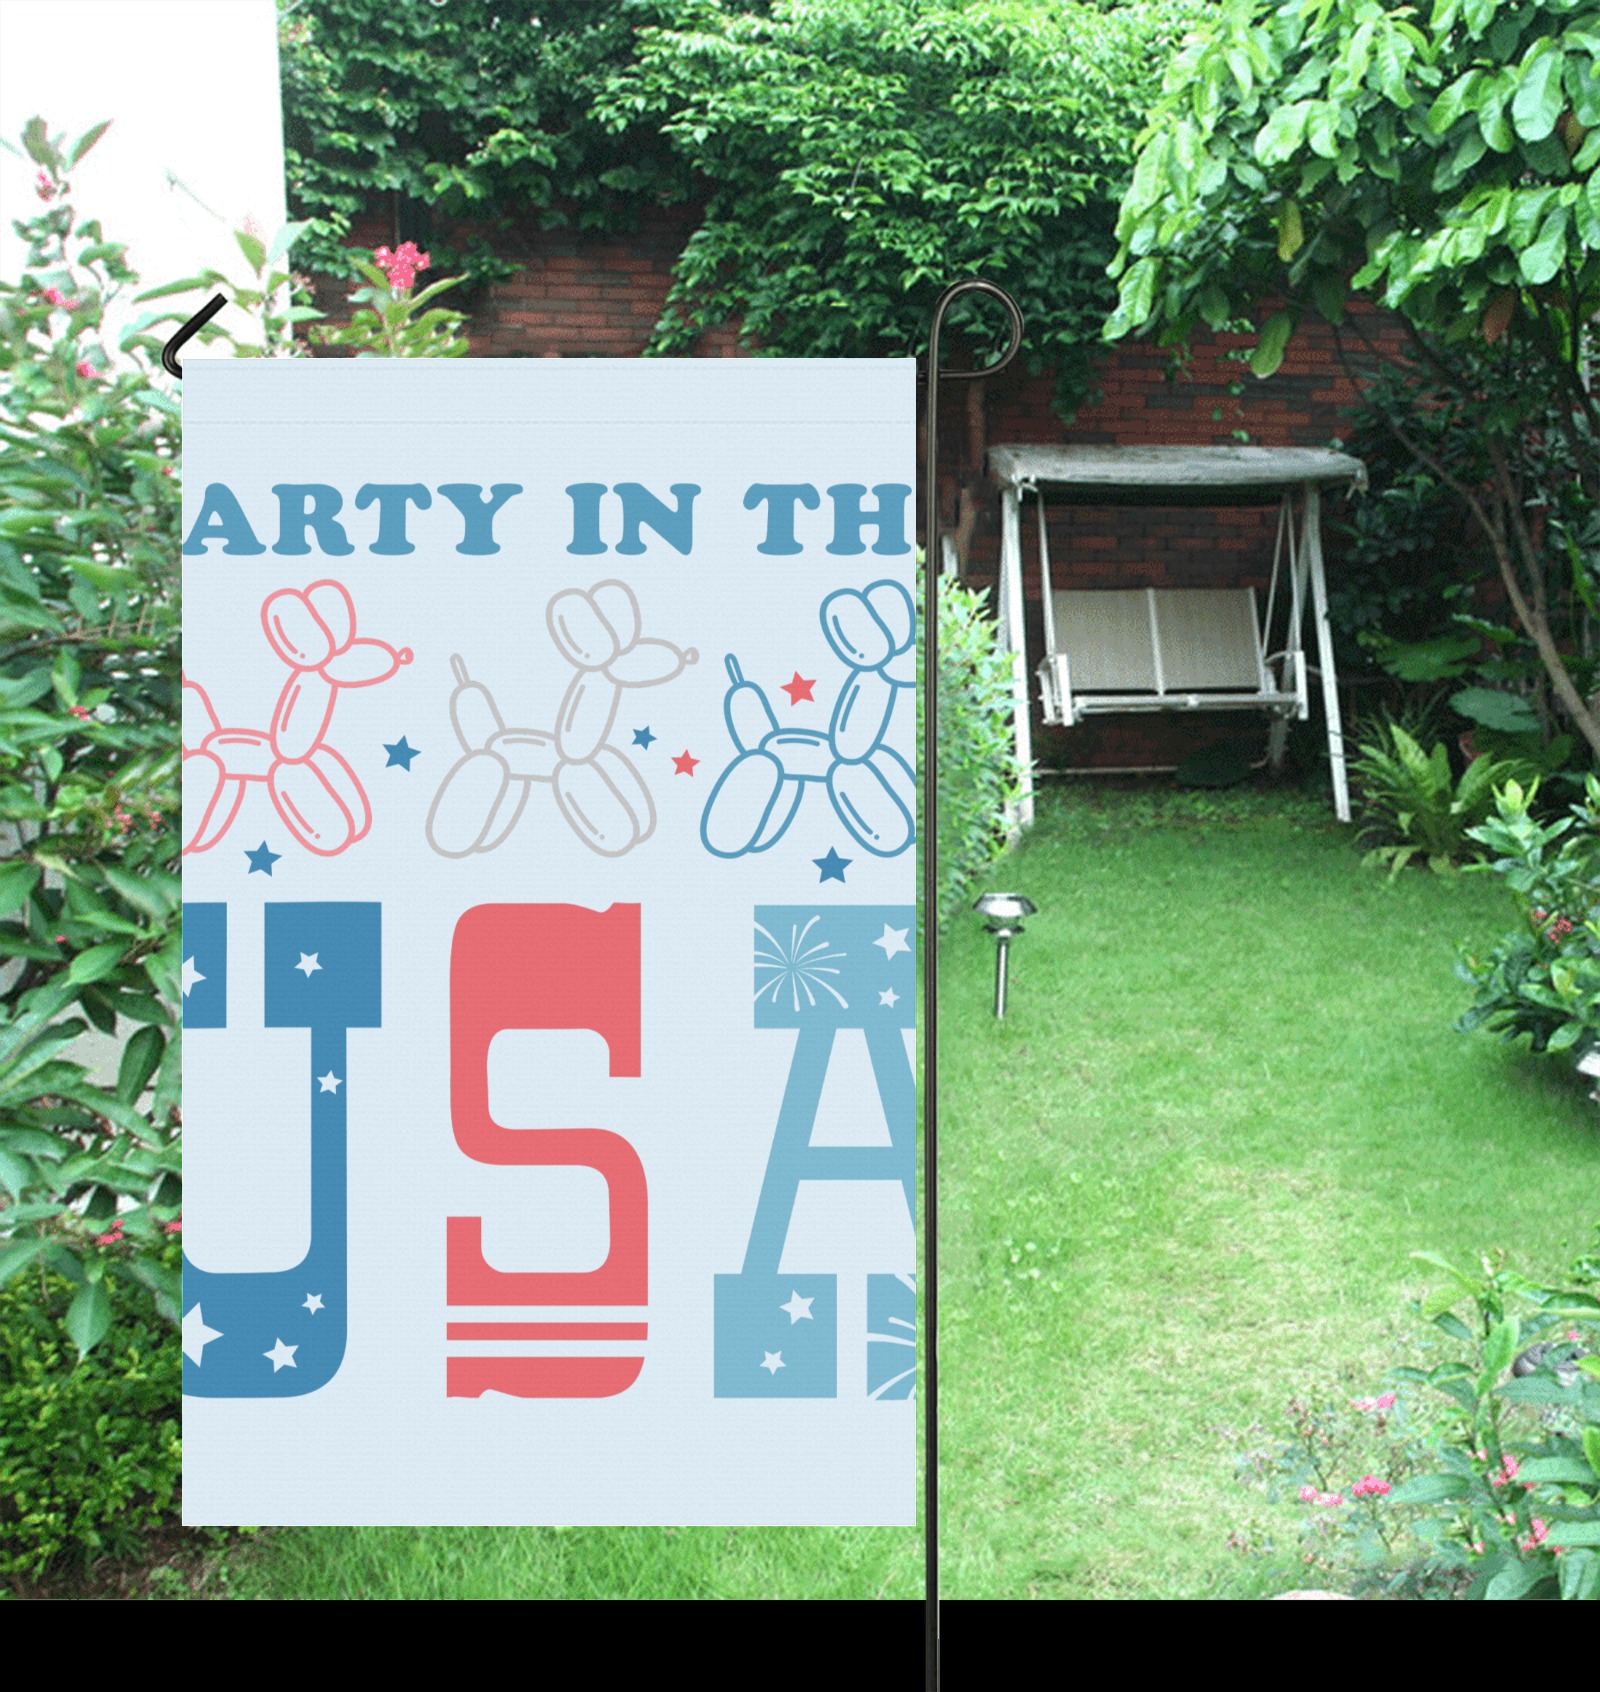 Retro Party In The USA Garden Flag 36''x60'' (Two Sides Printing)